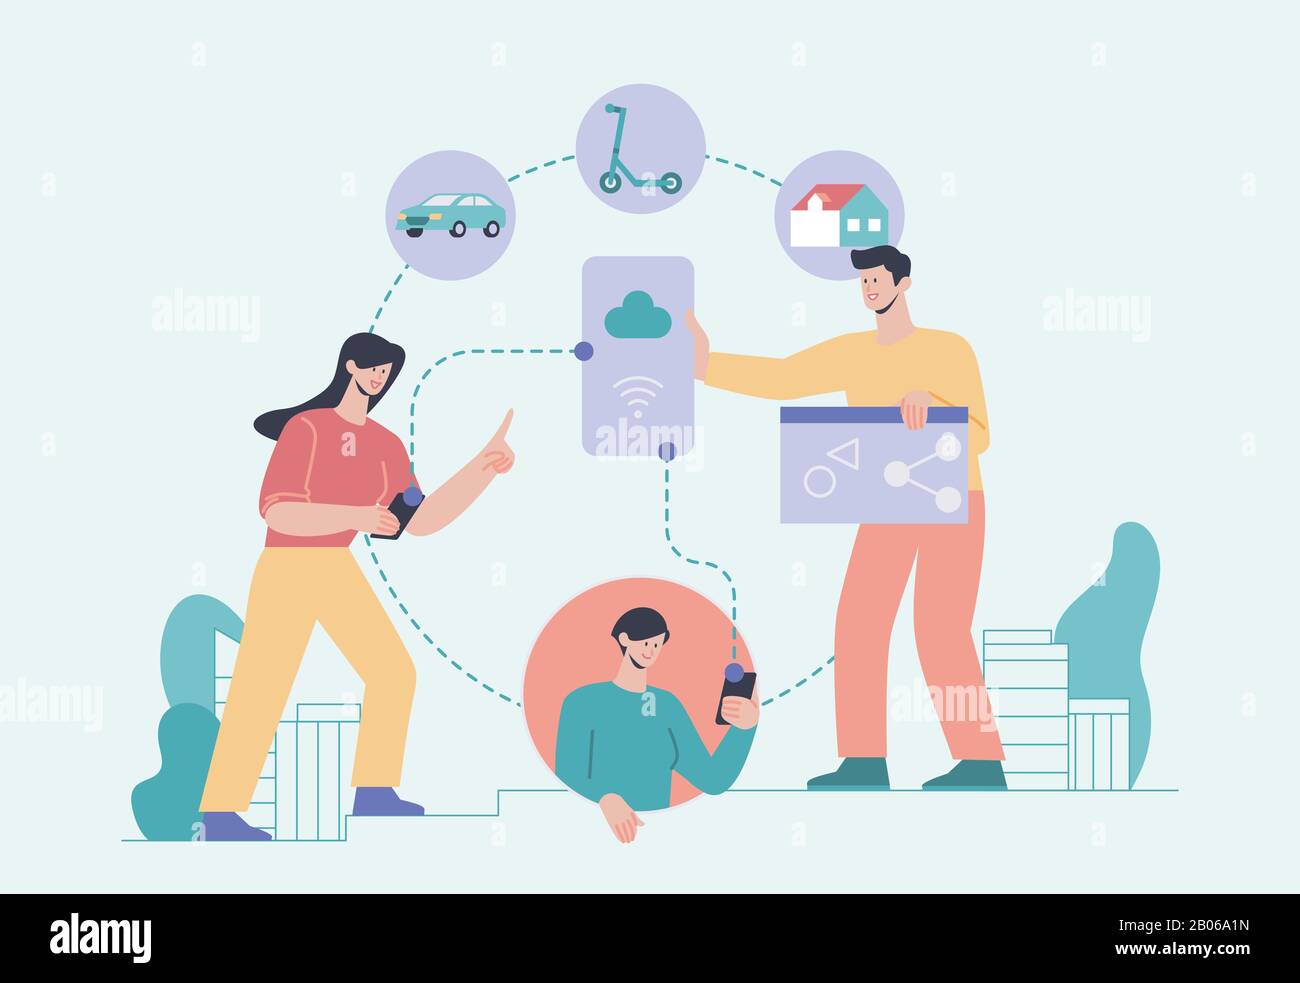 Sharing economy and smart consumption concept illustration 001 Stock Vector  Image & Art - Alamy